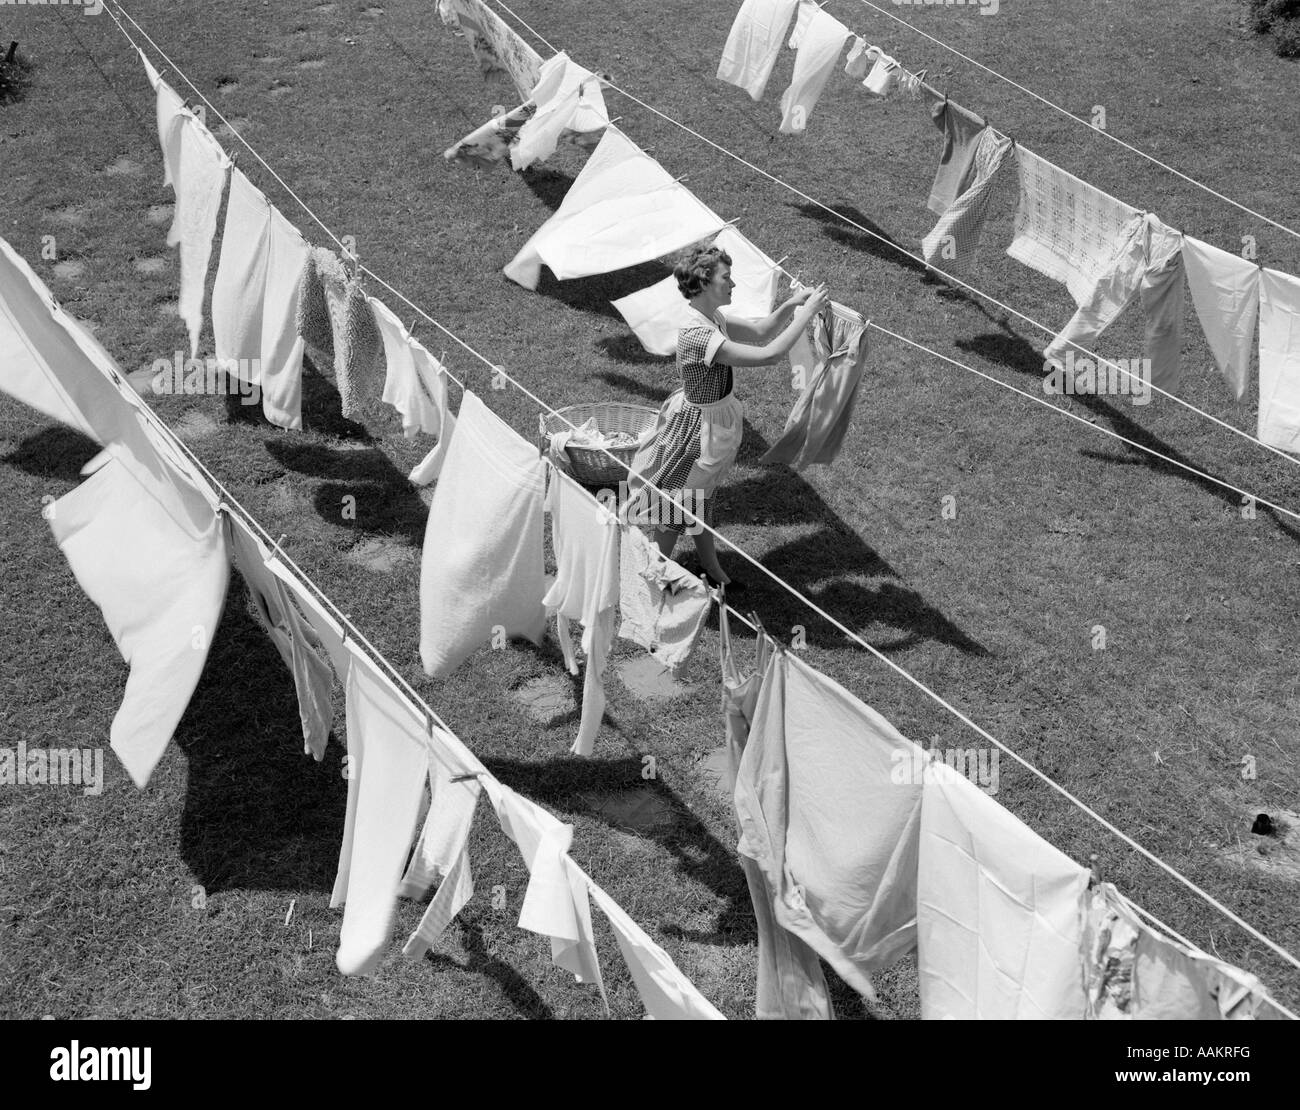 1950s WOMAN HANGING LAUNDRY OUTDOORS ON SEVERAL CLOTHESLINES Stock Photo